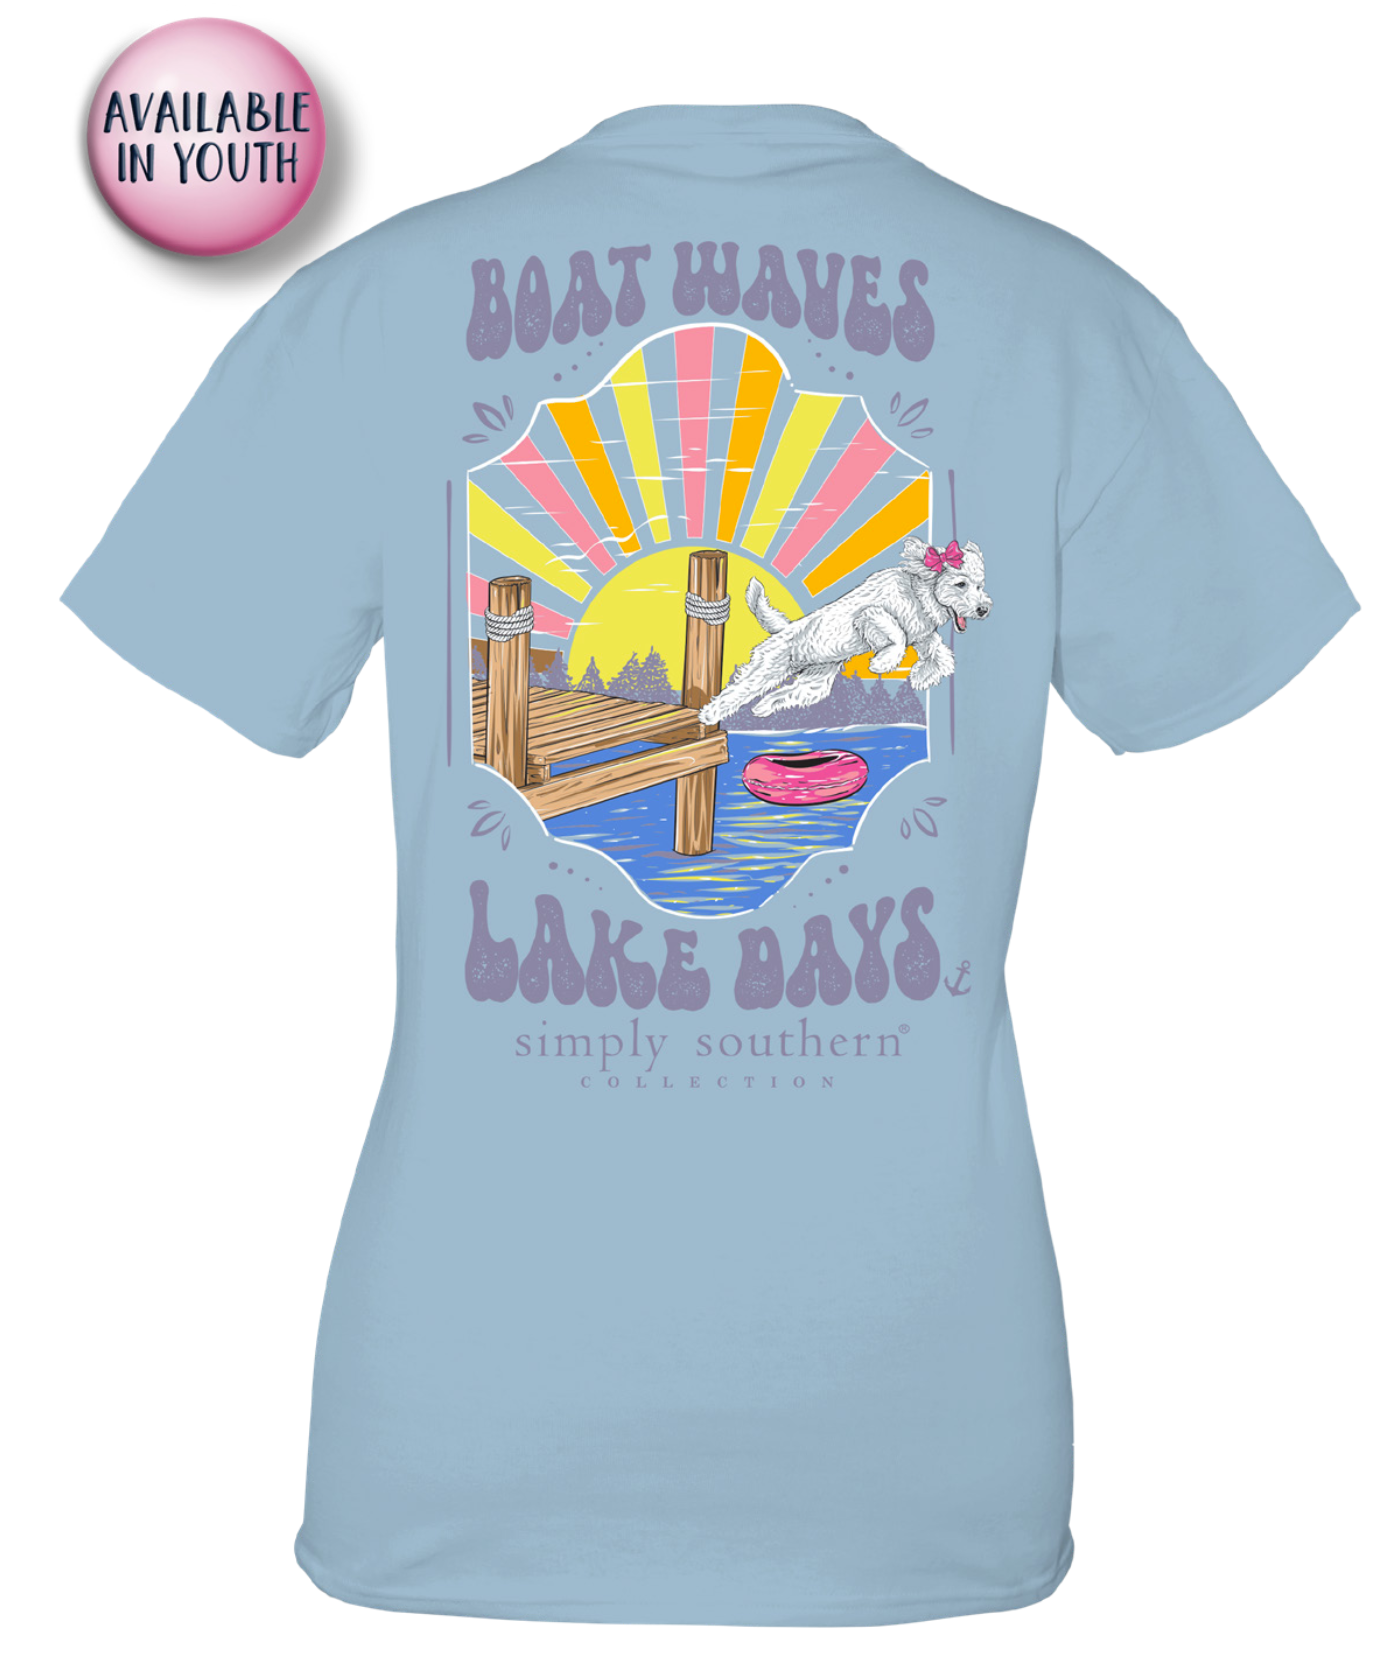 'Boat Waves & Lake Days' Short Sleeve Tee by Simply Southern